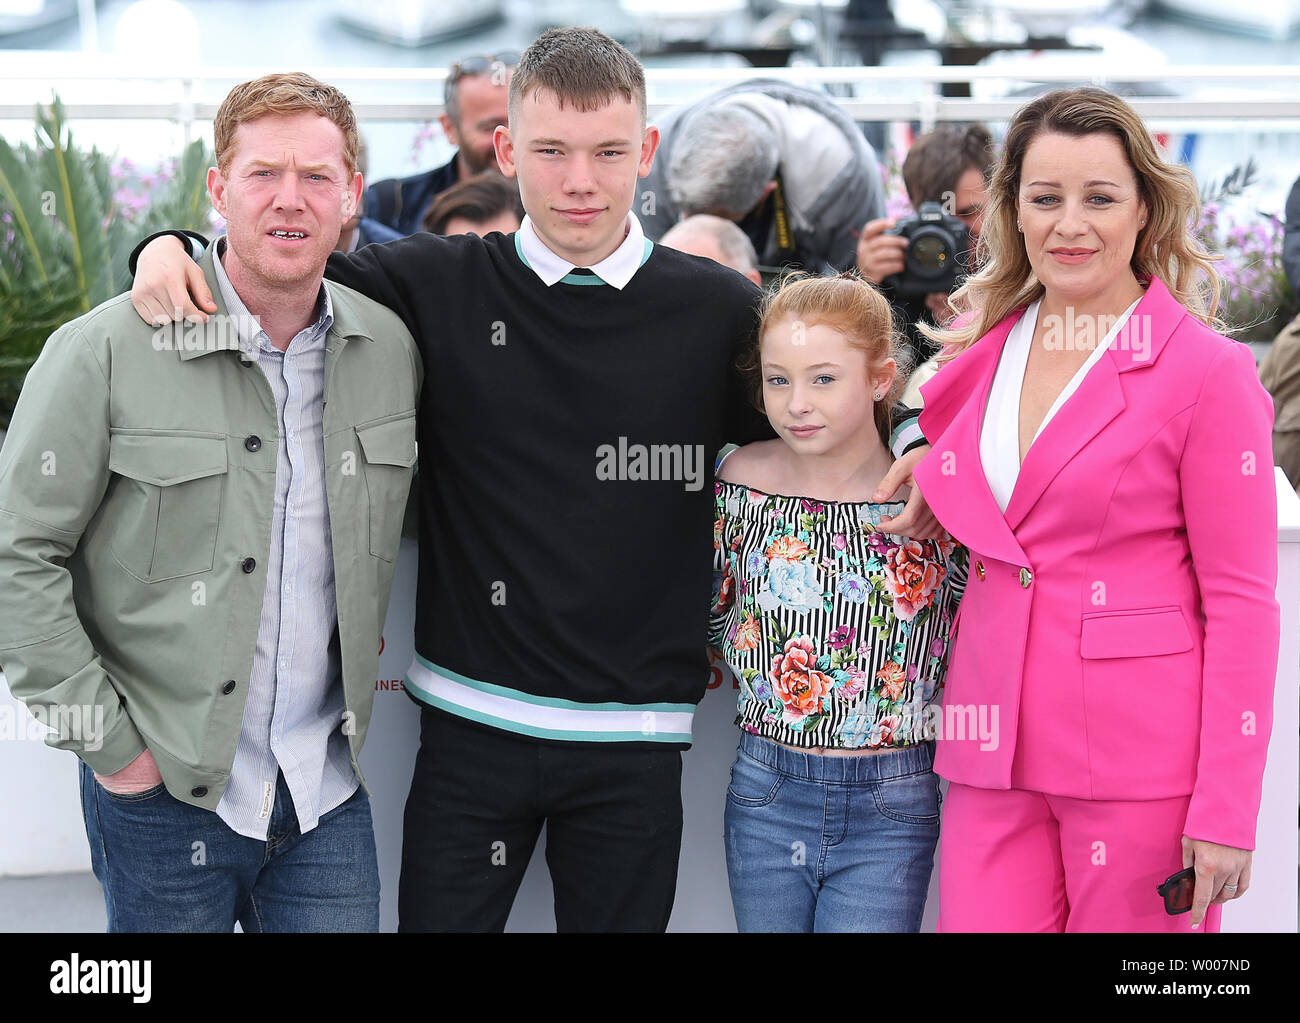 (From L to R) Kris Hitchen, Rhys Stone, Katie Proctor and Debbie Honeywood arrive at a photocall for the film 'Sorry We Missed You' during the 72nd annual Cannes International Film Festival in Cannes, France on May 17, 2019.  Photo by David Silpa/UPI Stock Photo